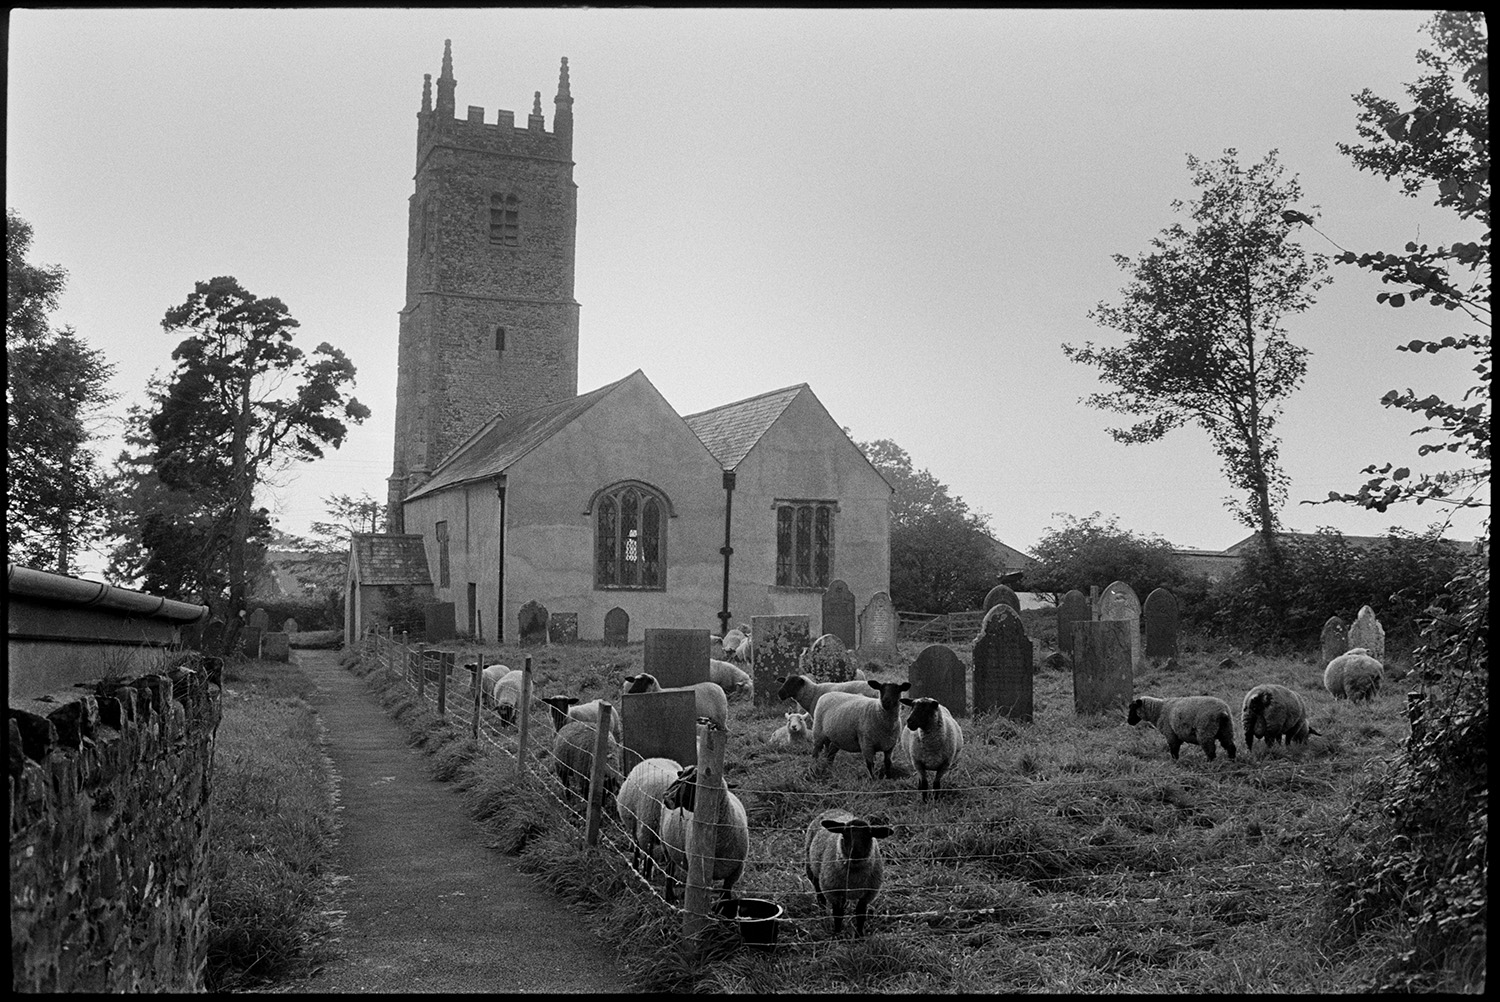 Sheep in grave yard. Church with tower.
[Sheep grazing amongst the gravestones at Dowland churchyard. The church and path running to it, is visible in the background. The churchyard is enclosed by a wire fence.]